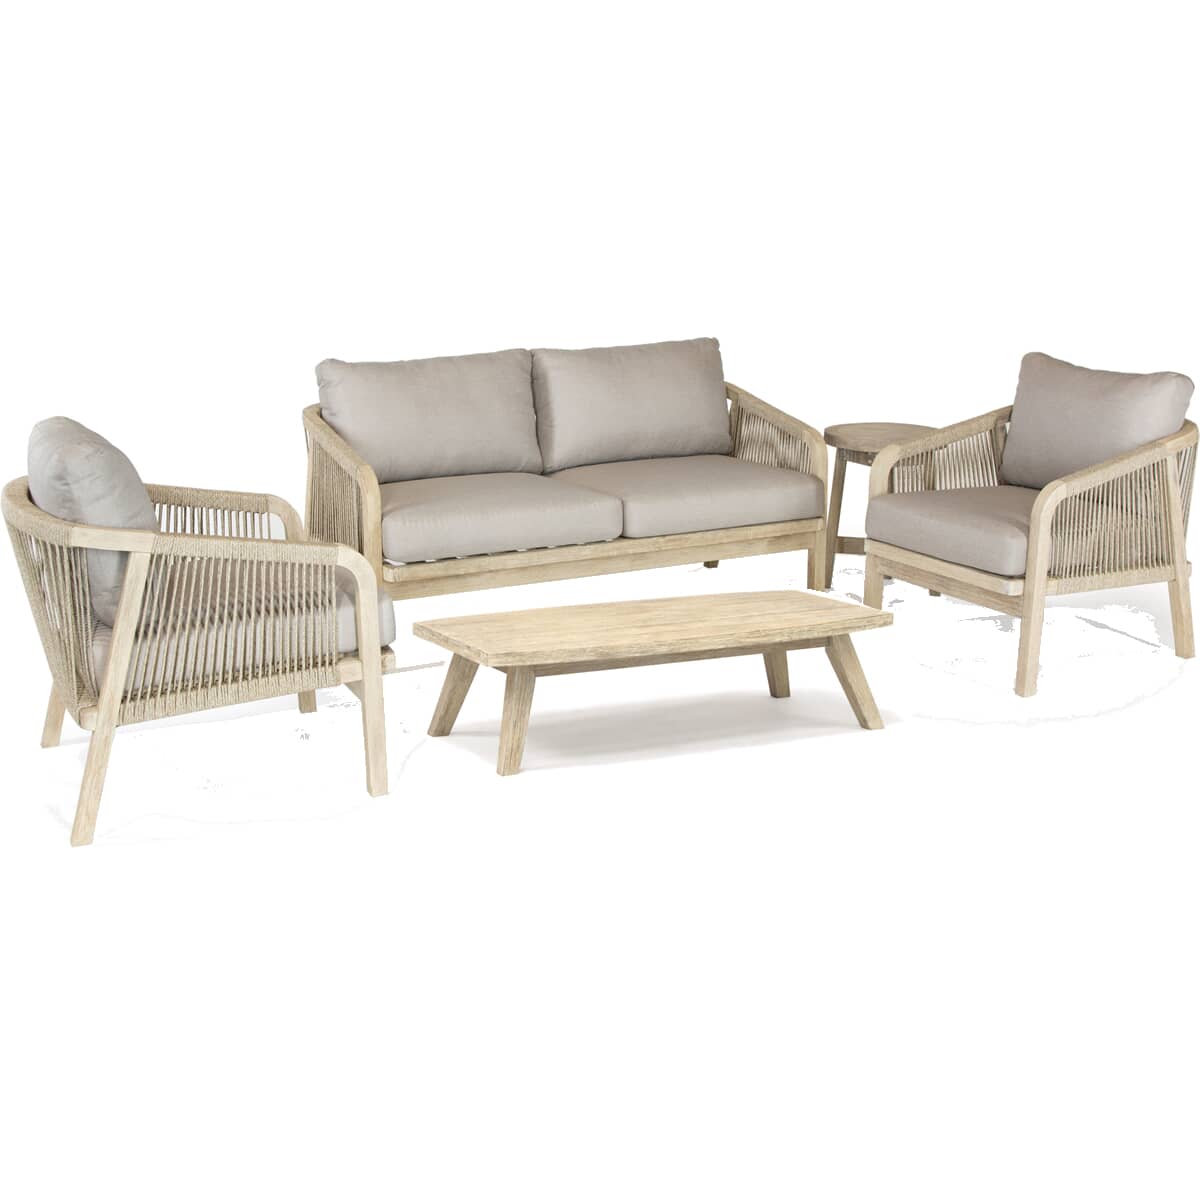 Kettler Cora Rope - 2 Seat Lounge Set with Rectangular Coffee Table